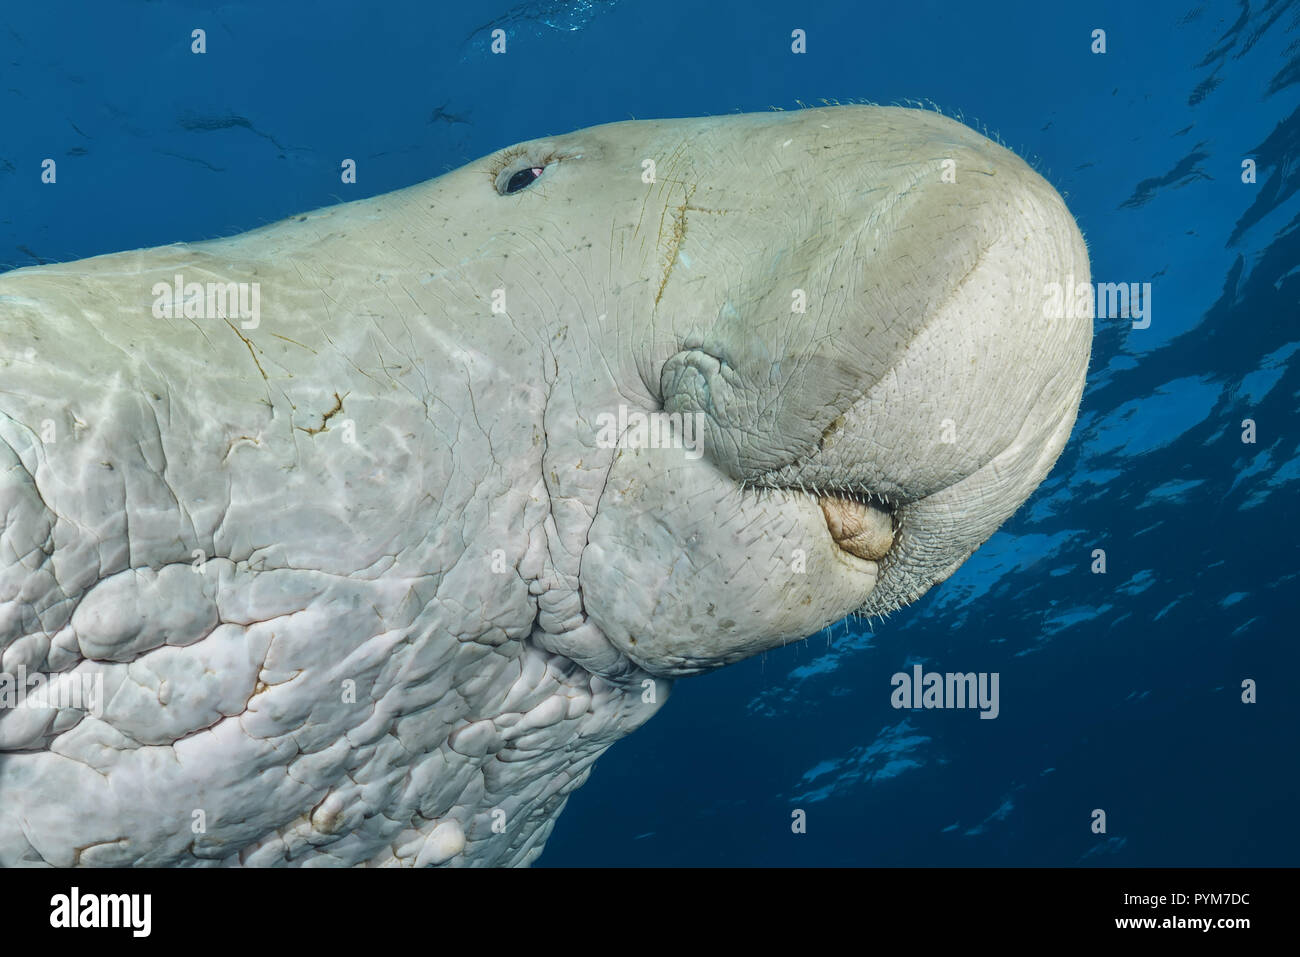 Portrait of  Dugong or Sea Cow, Dugong dugon swim in the blue water under surface Stock Photo